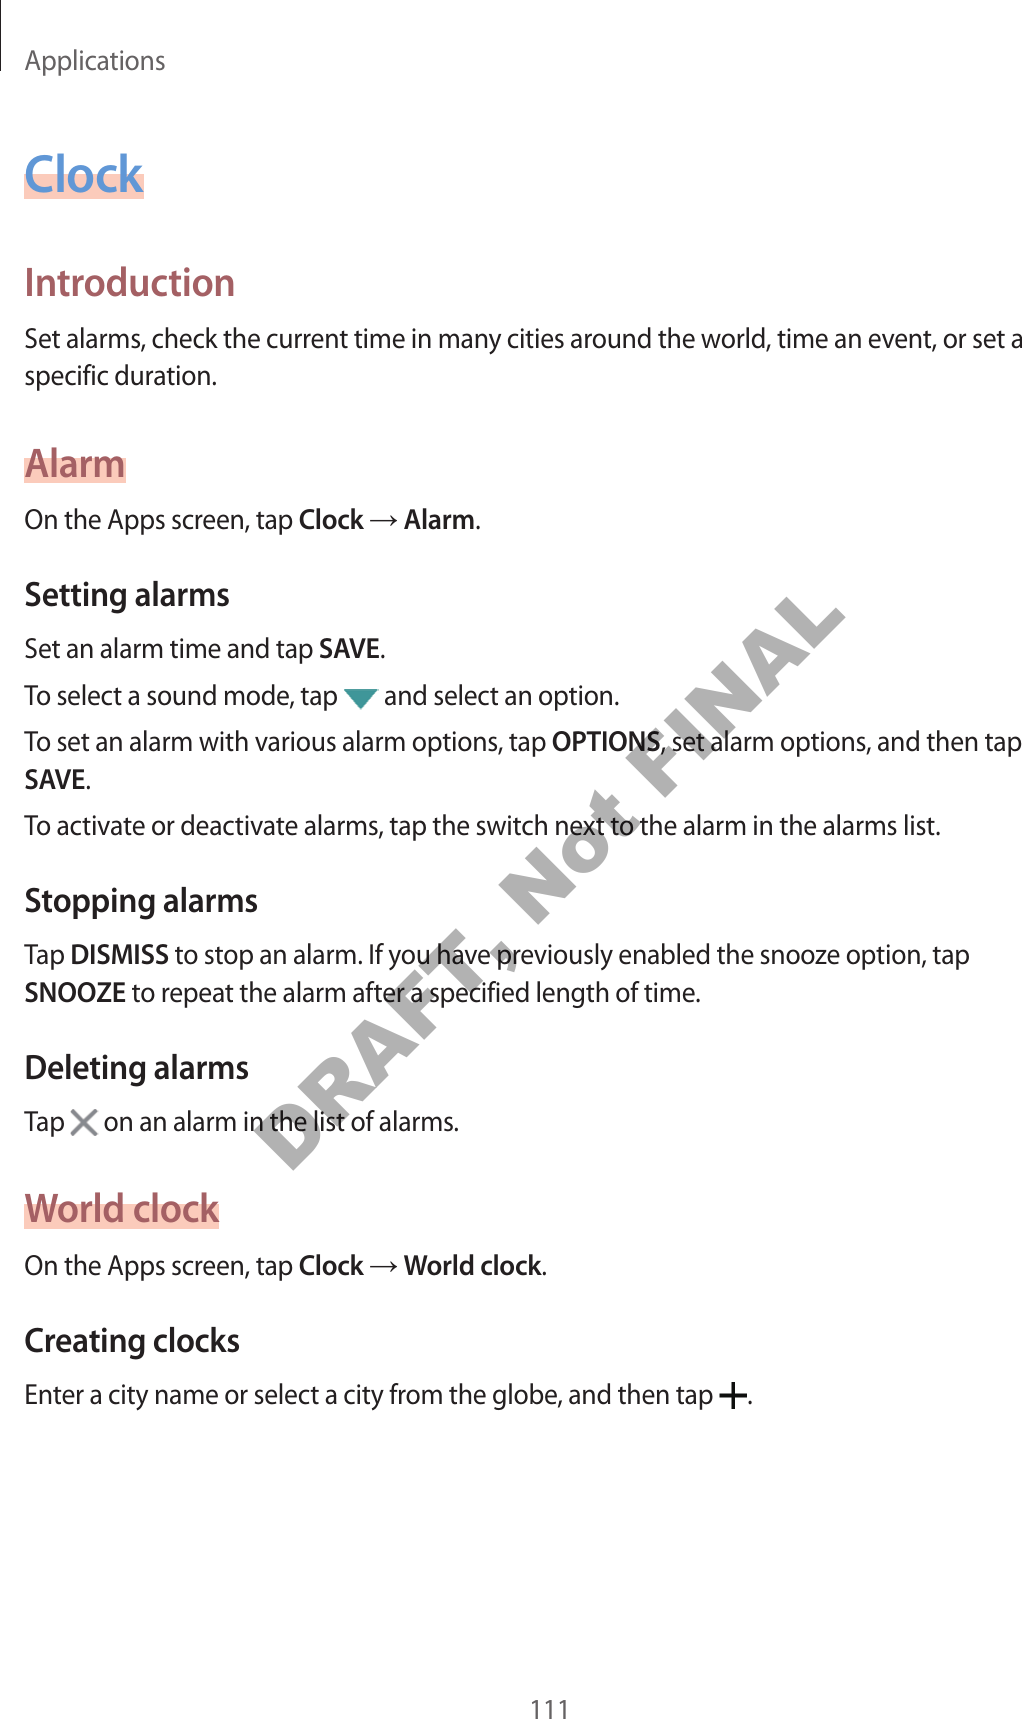 Applications111ClockIntroductionSet alarms, check the current time in many cities around the world, time an event, or set a specific duration.AlarmOn the Apps screen, tap Clock  Alarm.Setting alarmsSet an alarm time and tap SAVE.To select a sound mode, tap   and select an option.To set an alarm with various alarm options, tap OPTIONS, set alarm options, and then tap SAVE.To activate or deactivate alarms, tap the switch next to the alarm in the alarms list.Stopping alarmsTap DISMISS to stop an alarm. If you have previously enabled the snooze option, tap SNOOZE to repeat the alarm after a specified length of time.Deleting alarmsTap   on an alarm in the list of alarms.World clockOn the Apps screen, tap Clock  World clock.Creating clocksEnter a city name or select a city from the globe, and then tap  .DRAFT, Not FINAL